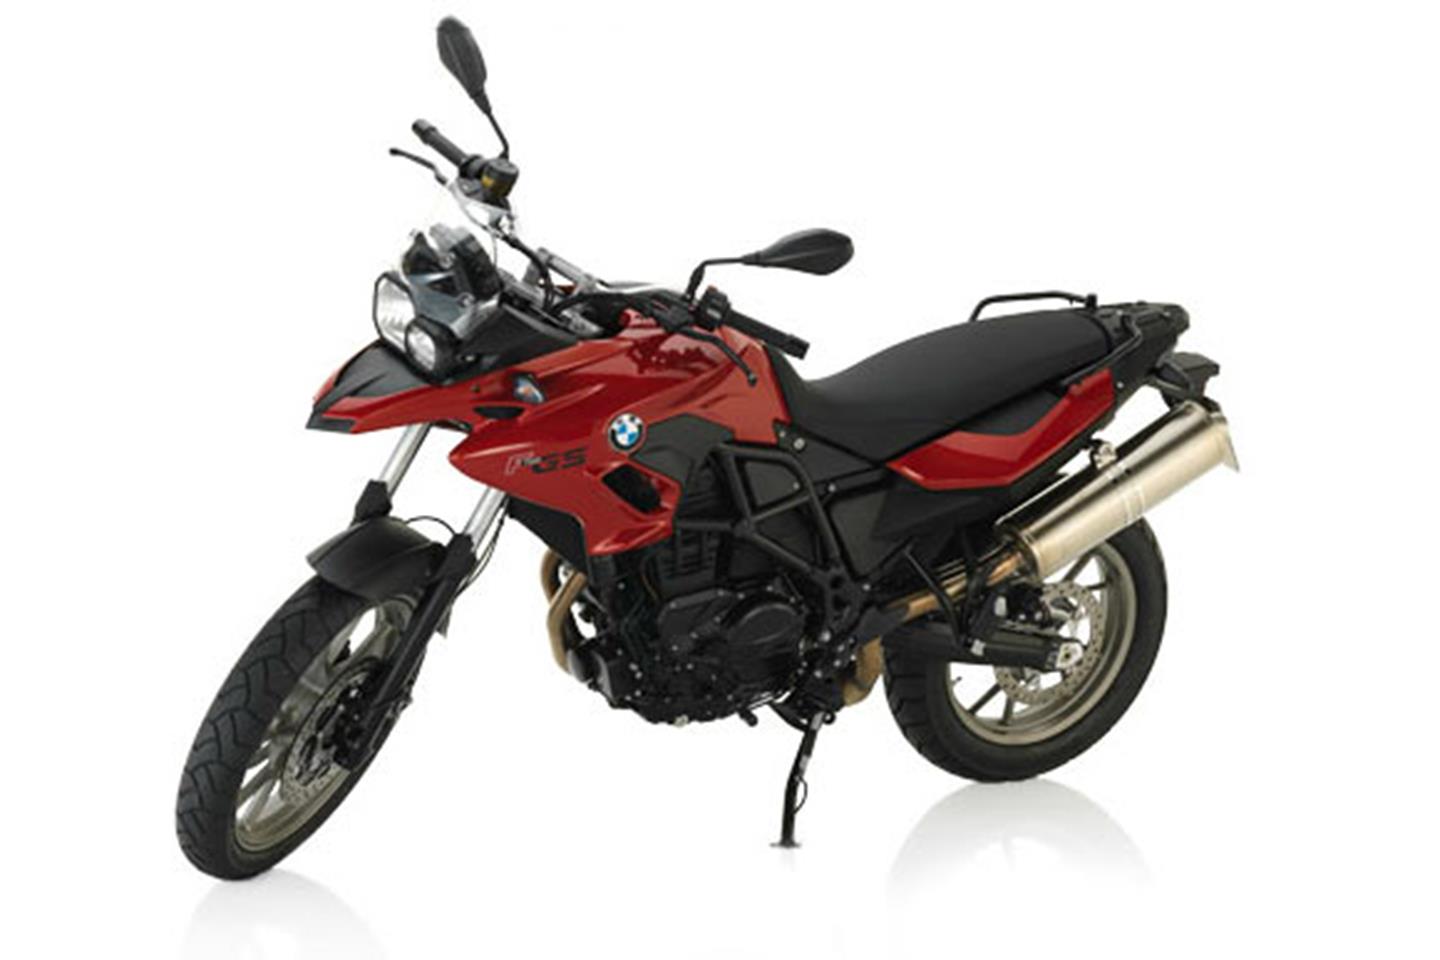 Bmw F 700 Gs Specs Bmw F700gs 2013 Specs Luxembourg, SAVE 47% - motorhomevoyager.co.uk